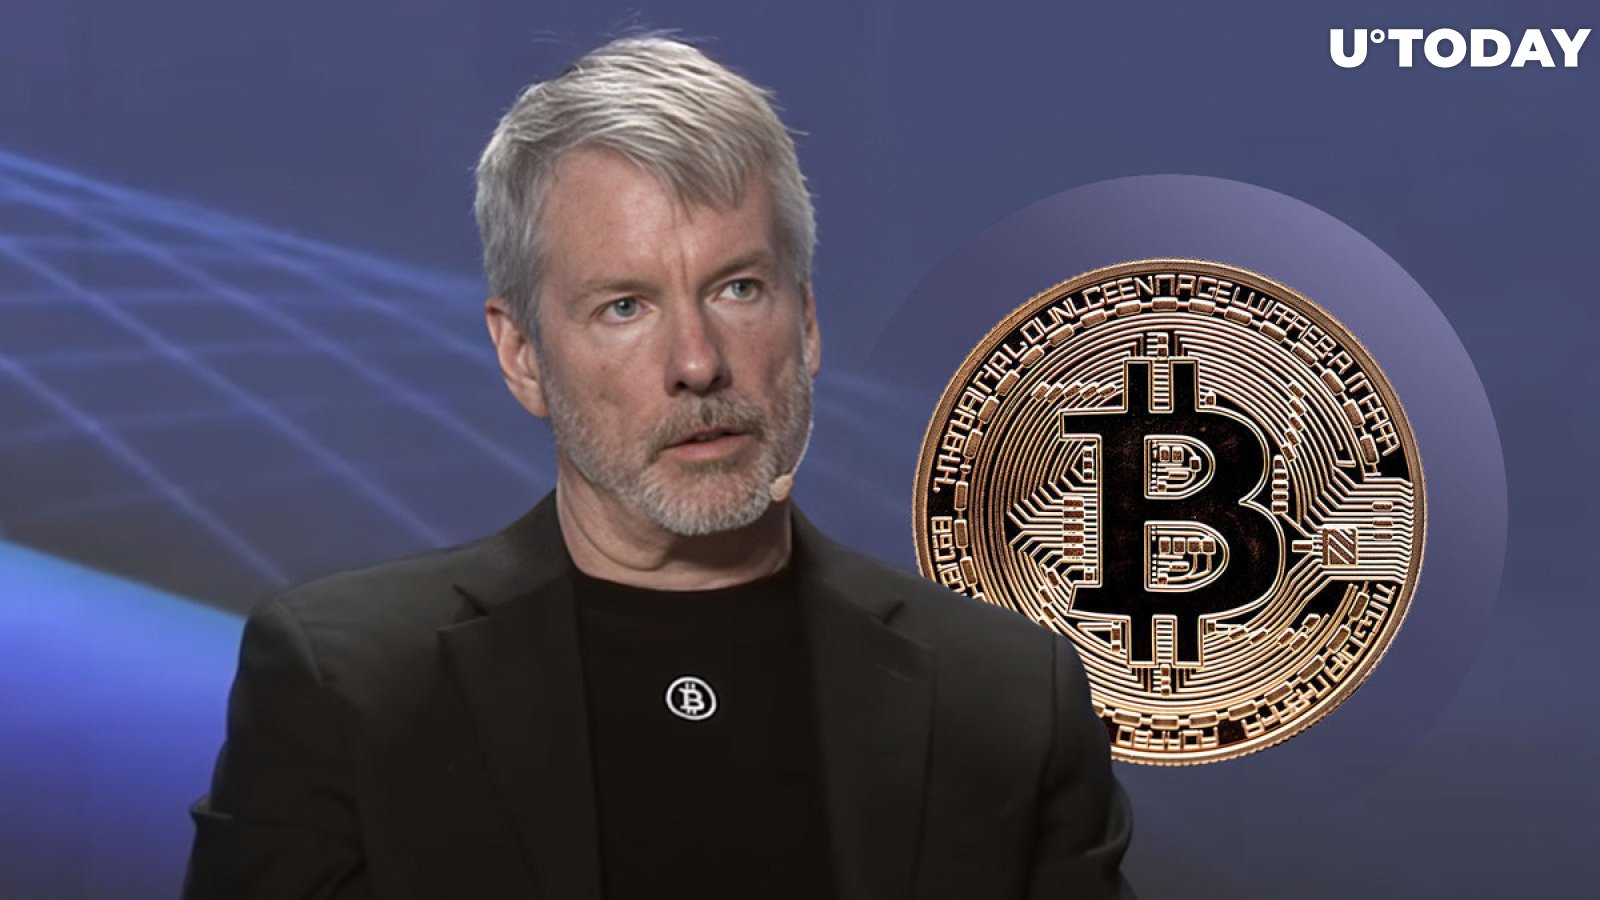 'Embrace Bitcoin' Michael Saylor's Tweet Raises Heated Discussion, Here's Why